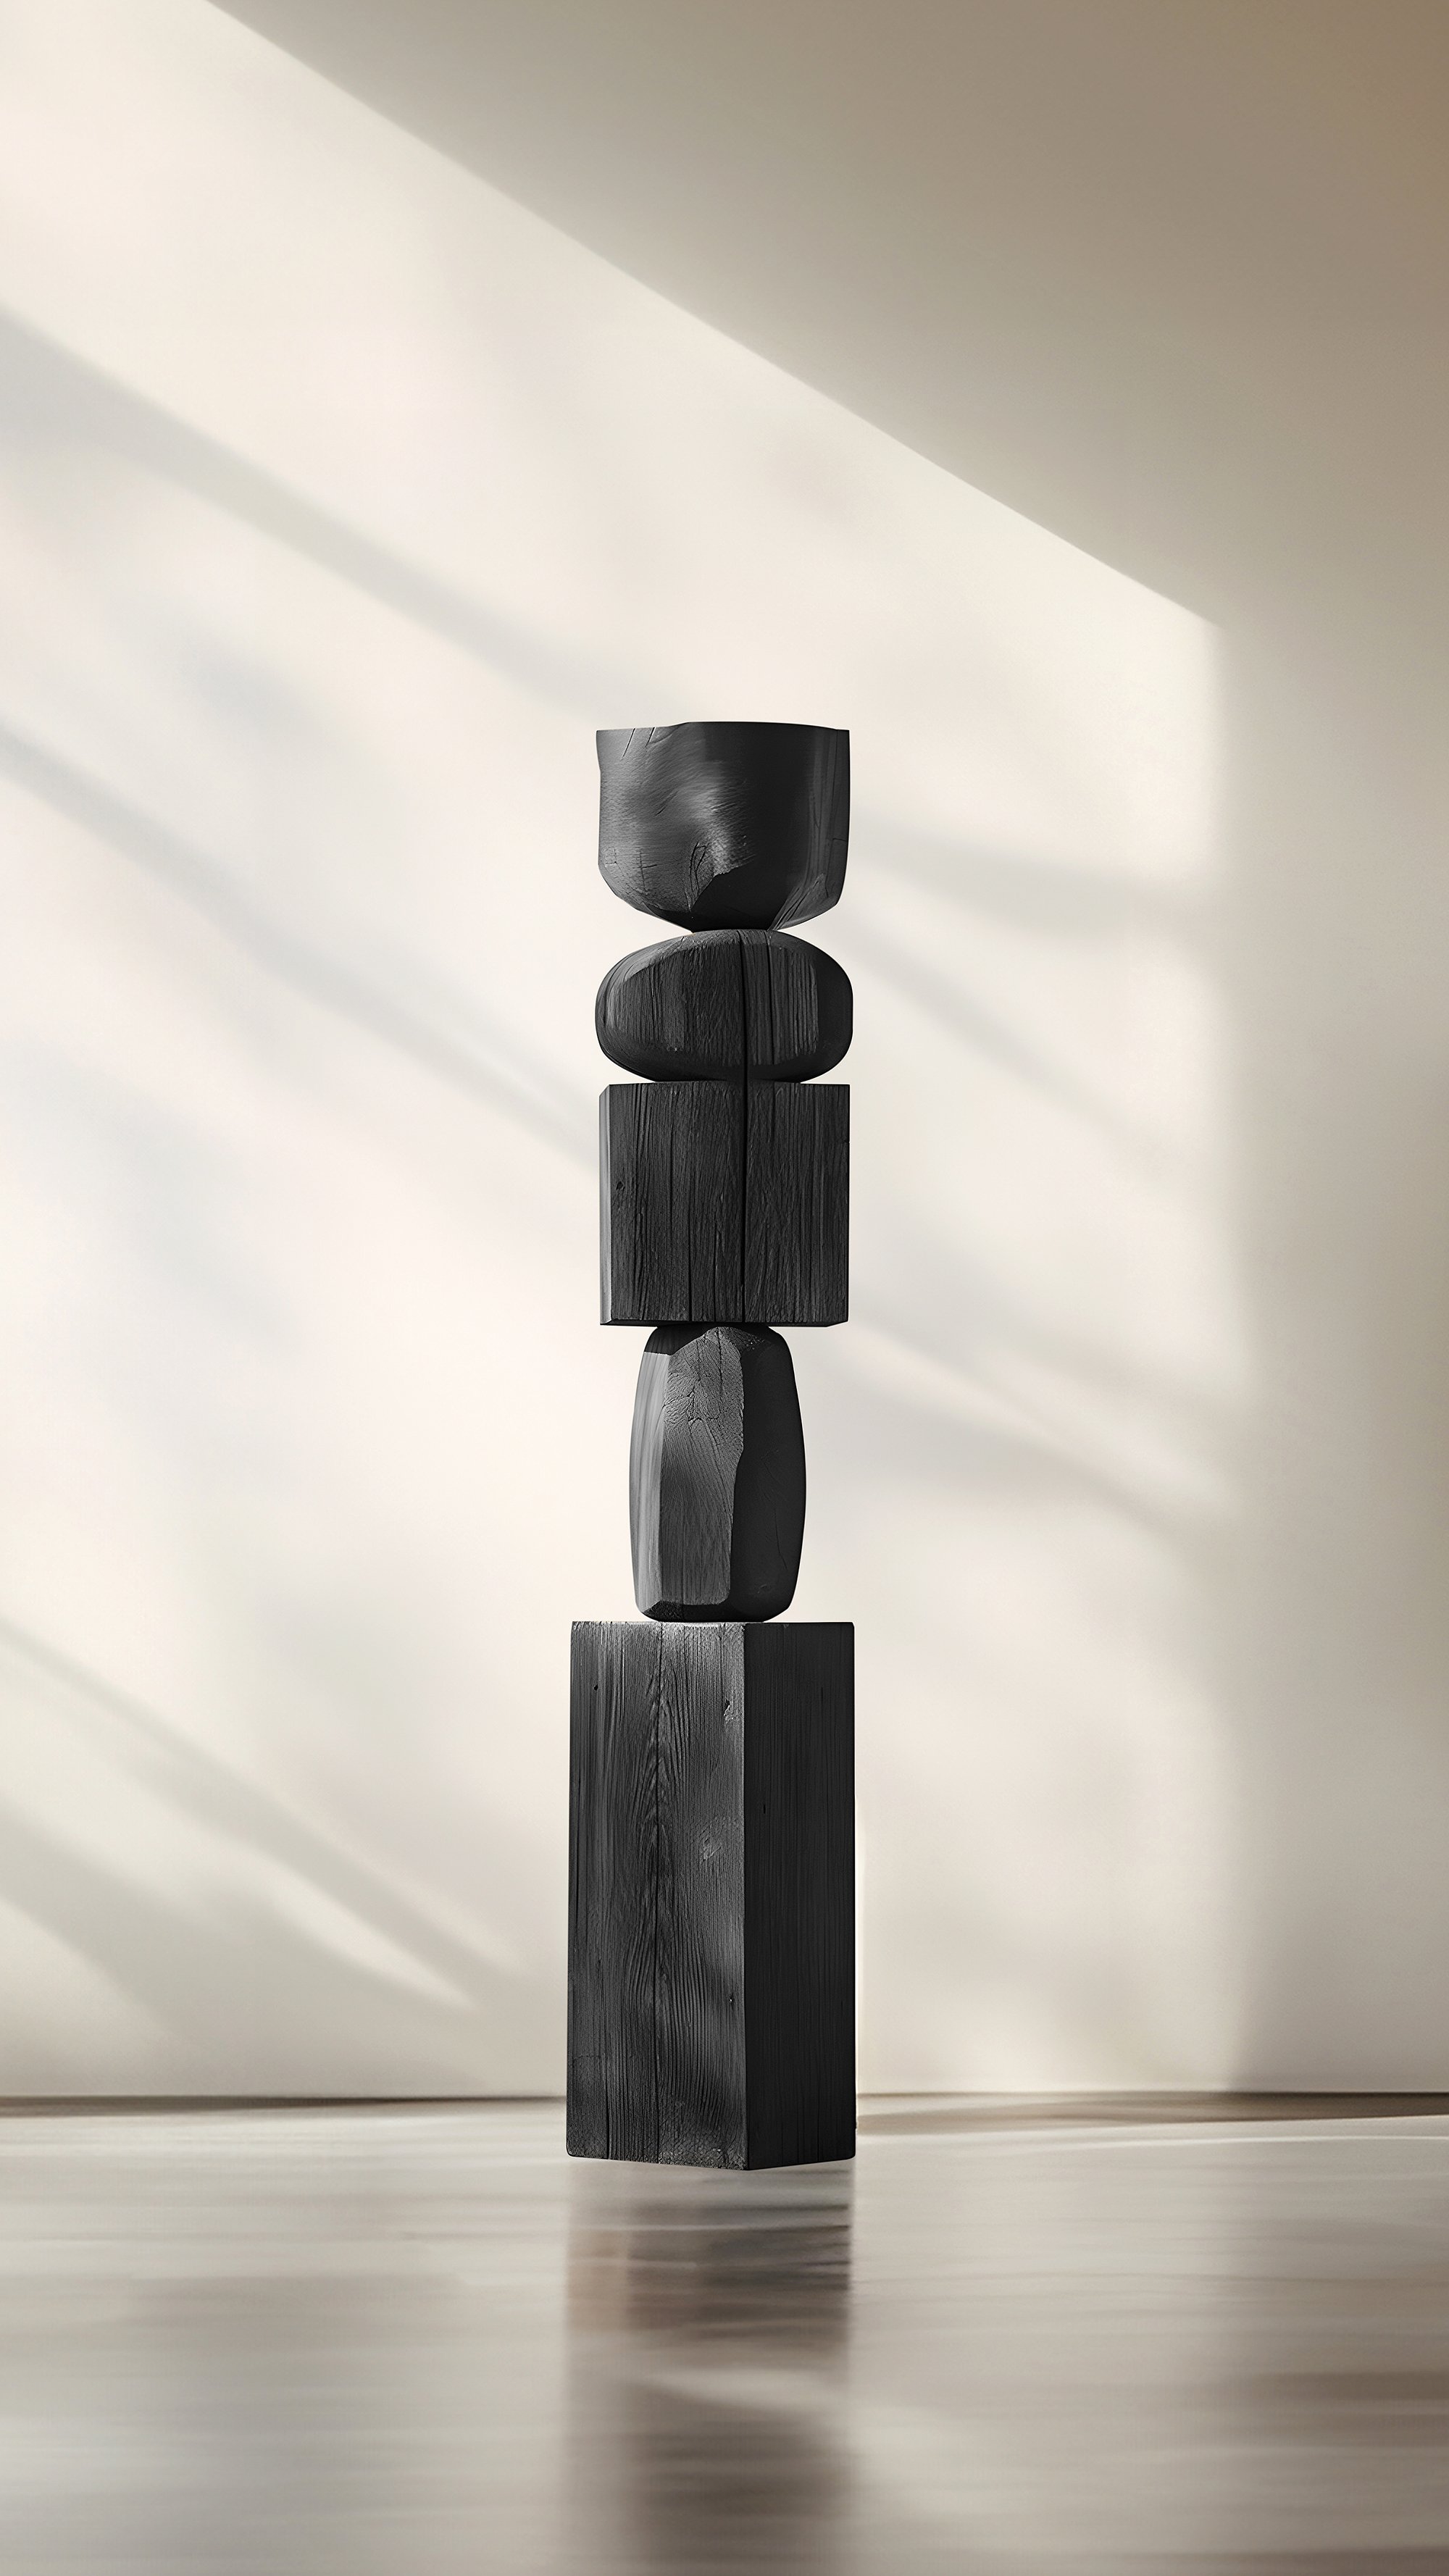 Escalona's Black Solid Wood Sculpture of Abstract Elegance, Still Stand No85 -5.jpg